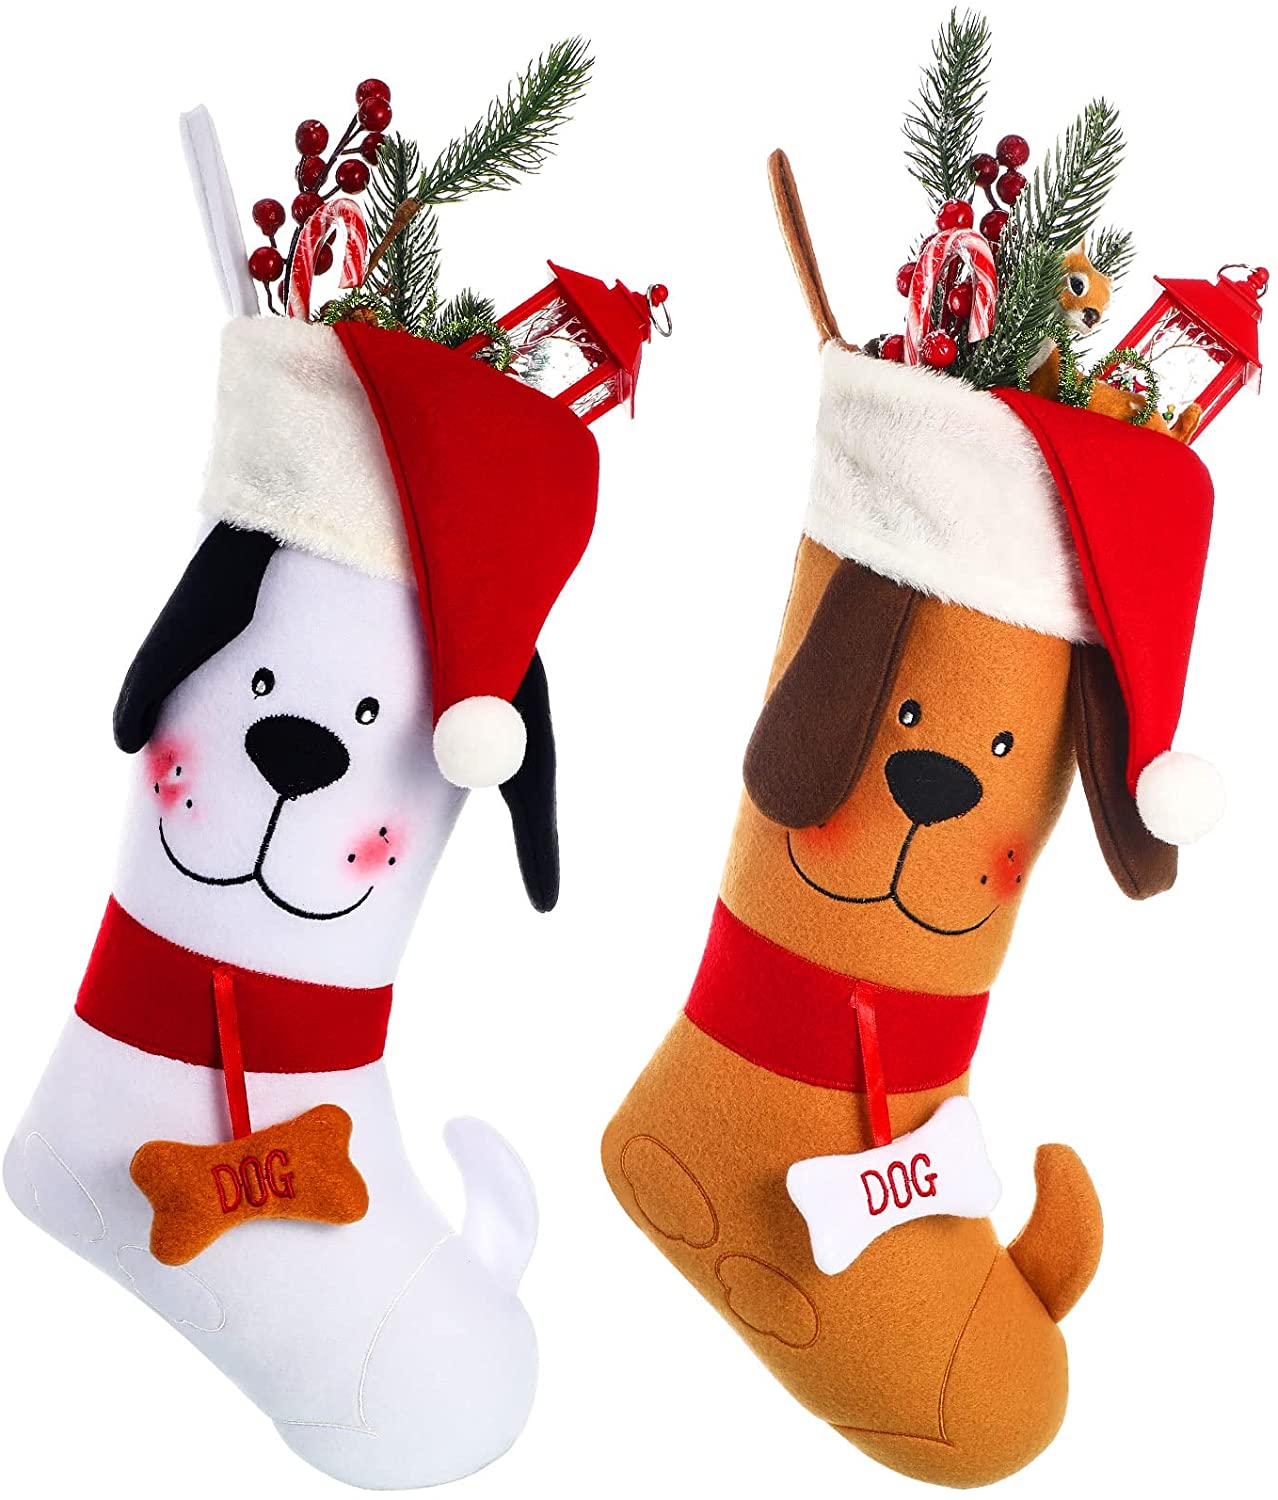 PERSONALIZED CHRISTMAS ORNAMENT PETS-DOG IN STOCKING 